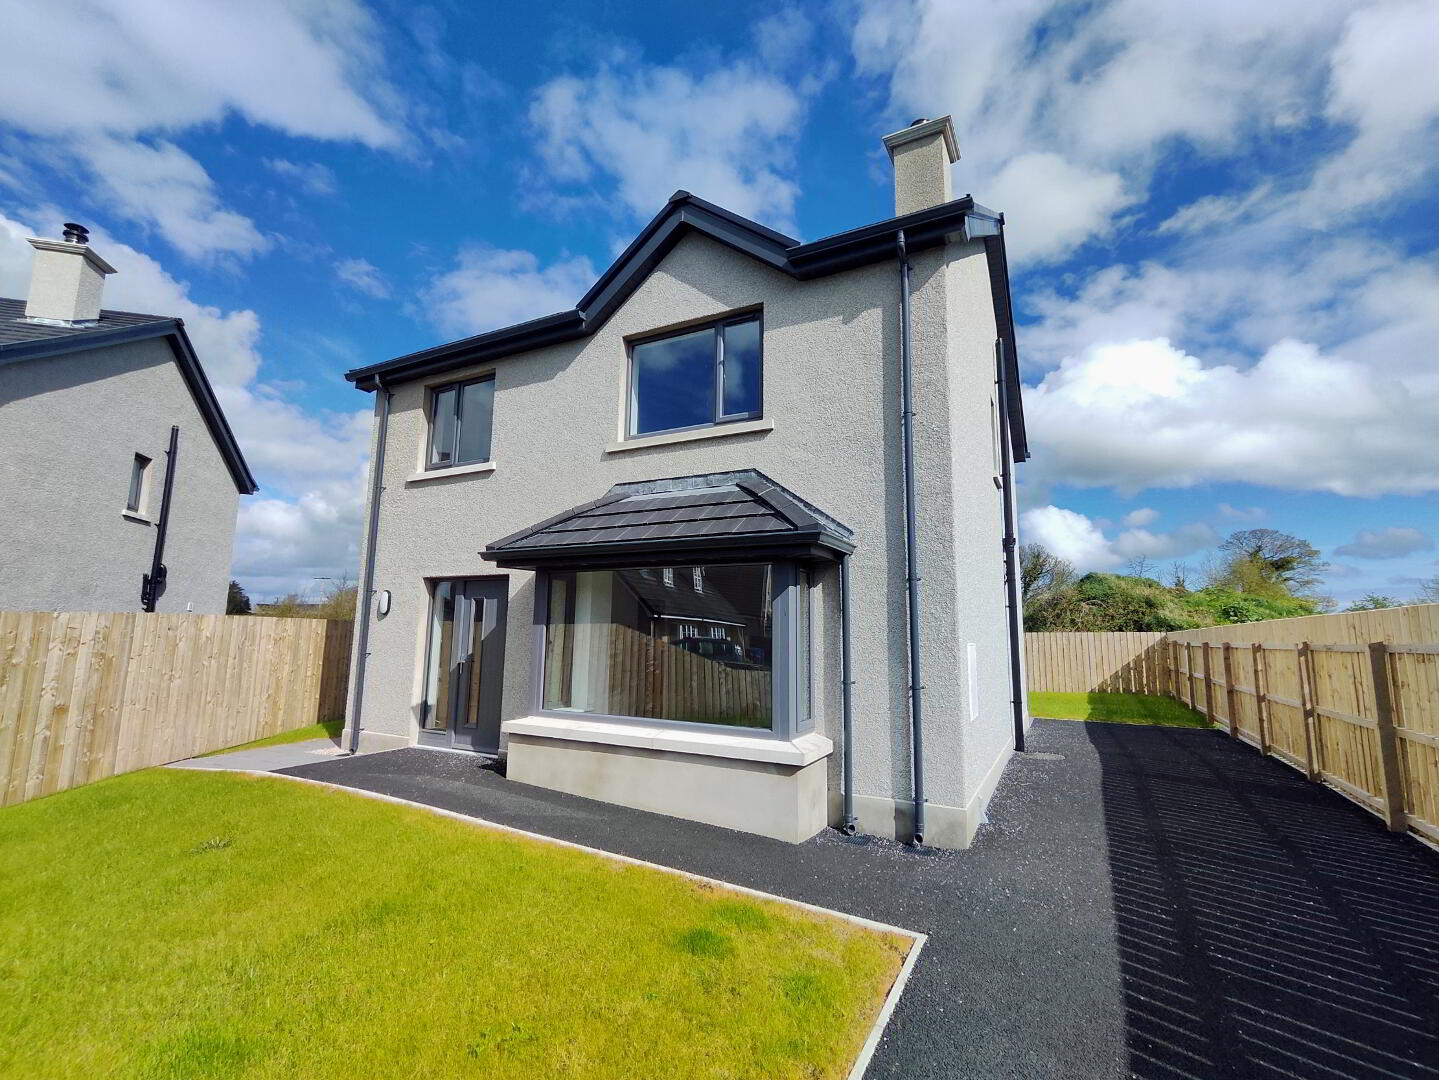 Detached (4 Bed) House Type E